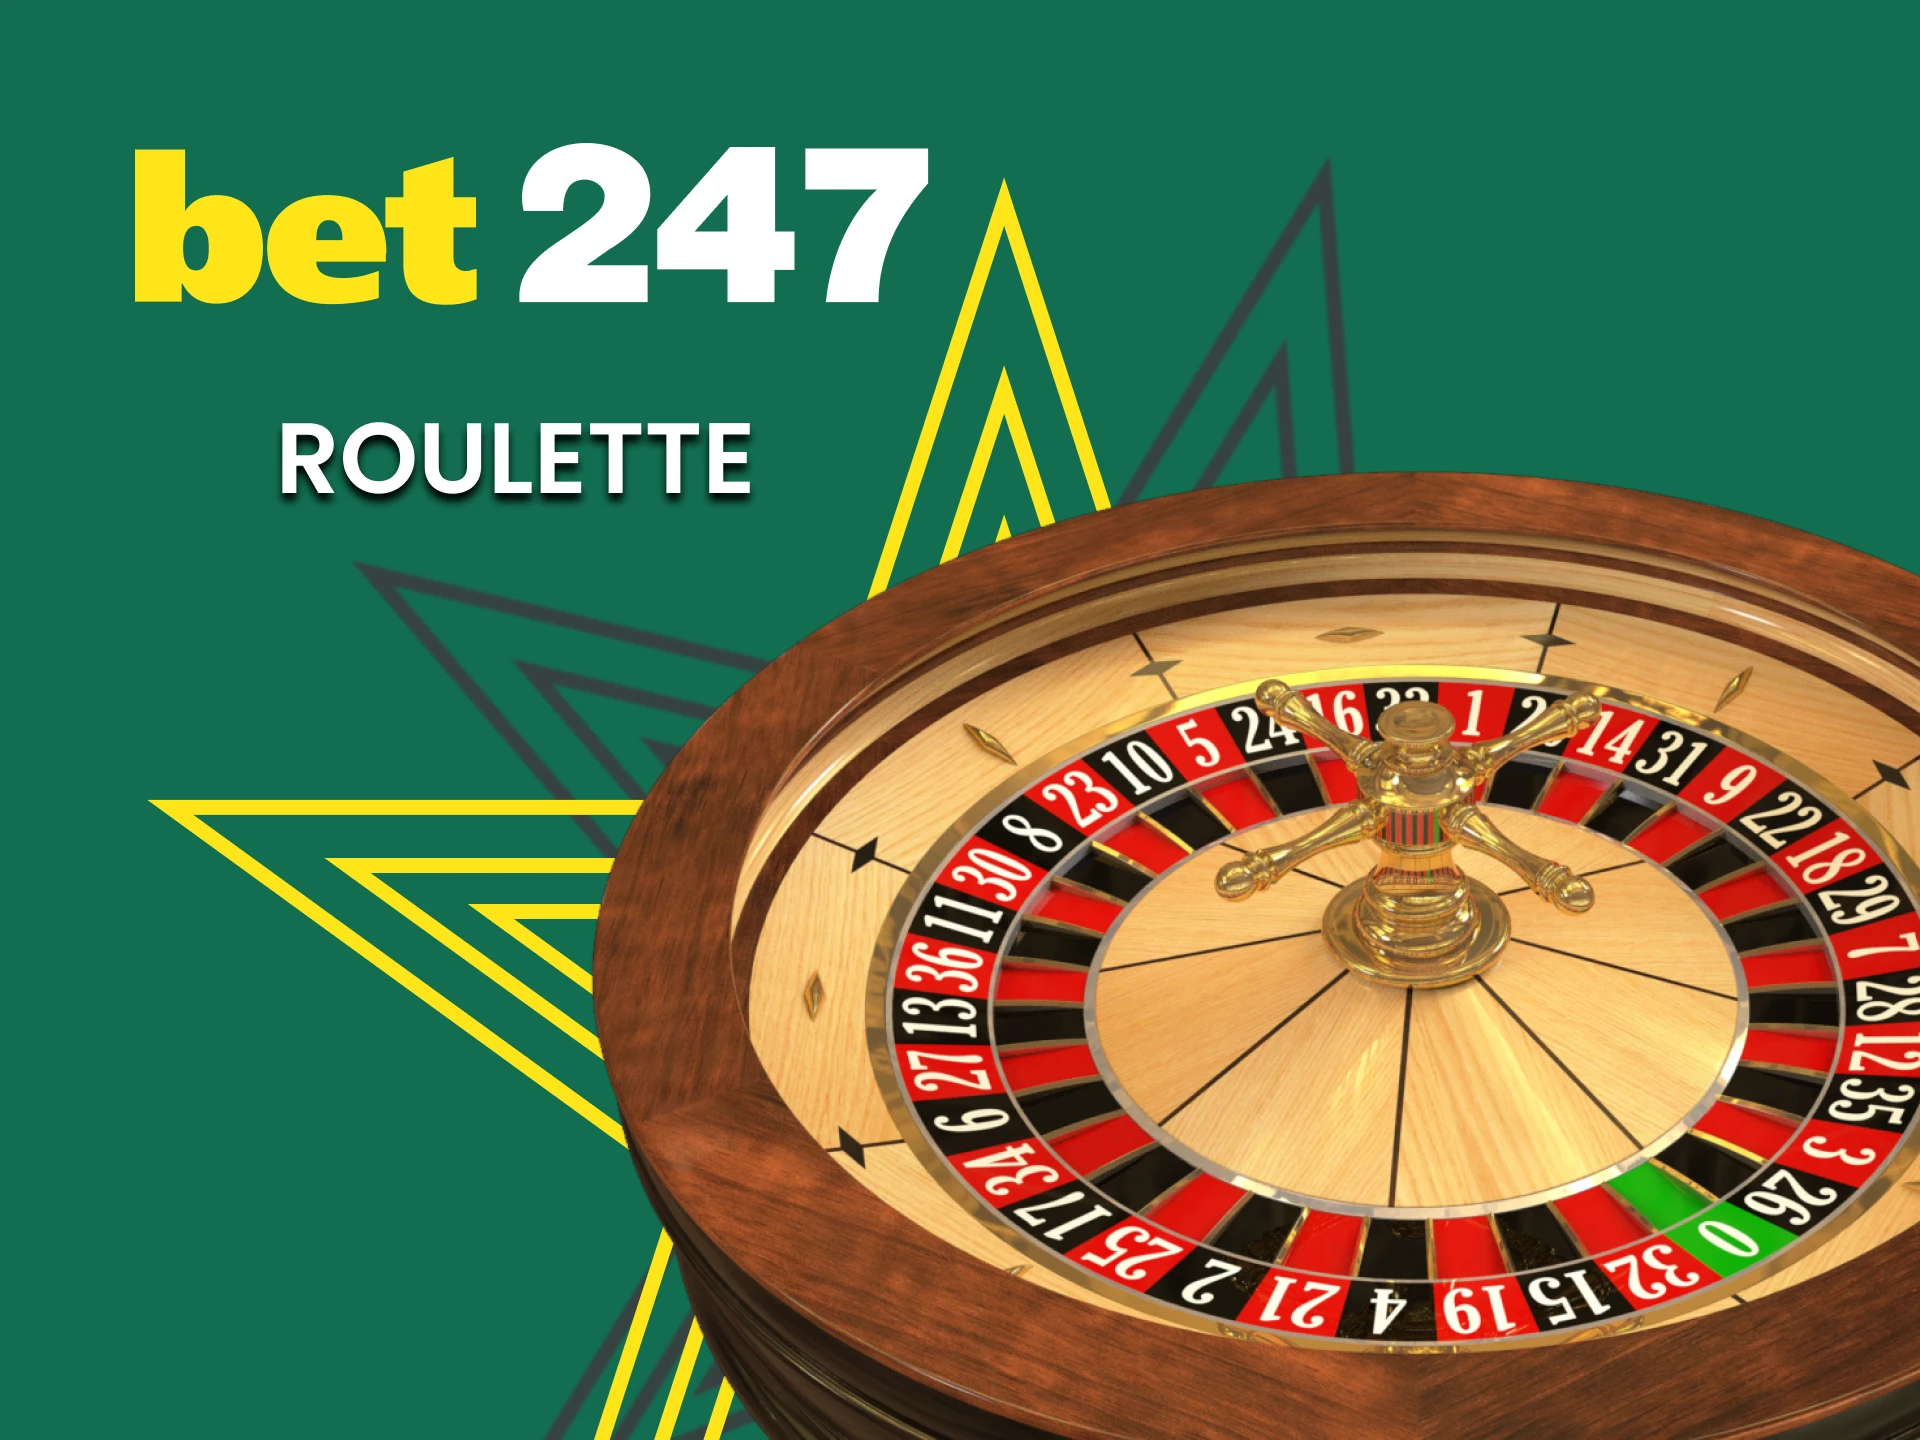 At Bet247, try your luck at roulette.